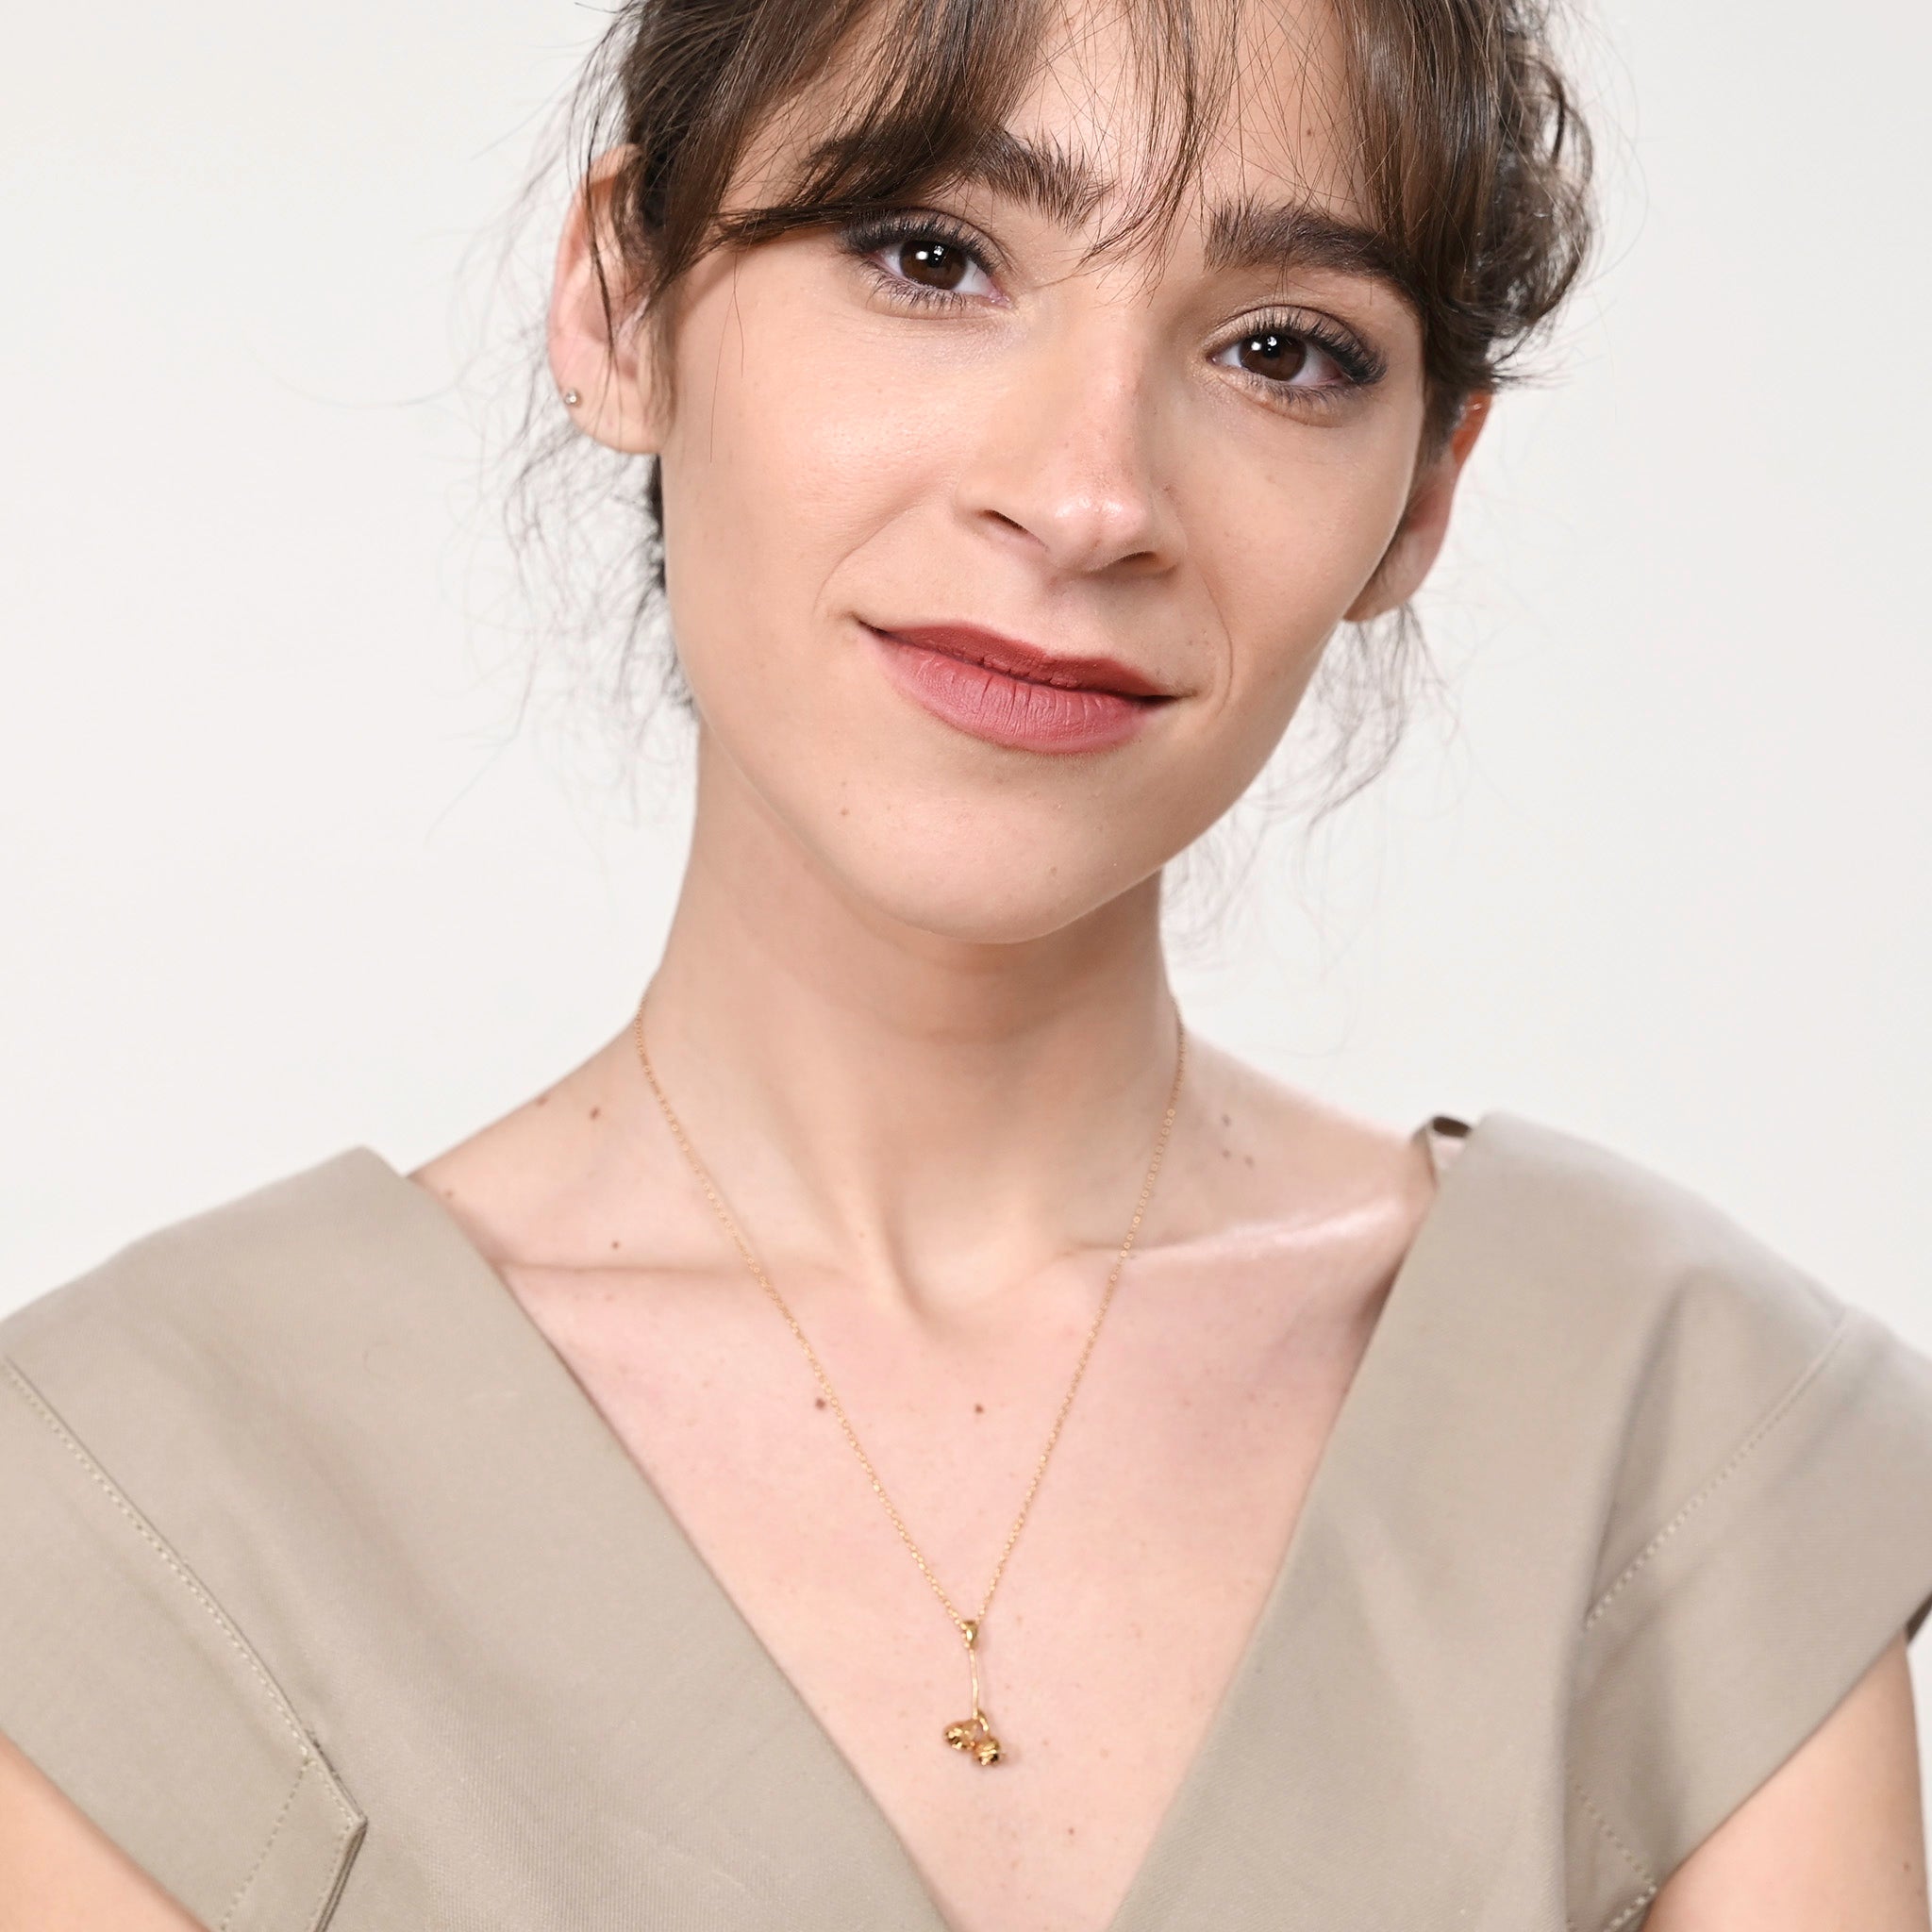 Model wearing a gold Eucalyptus seed necklace, showcasing the detailed craftsmanship of the small eucalyptus branch design with dried seed pods, adding a touch of nature-inspired elegance.